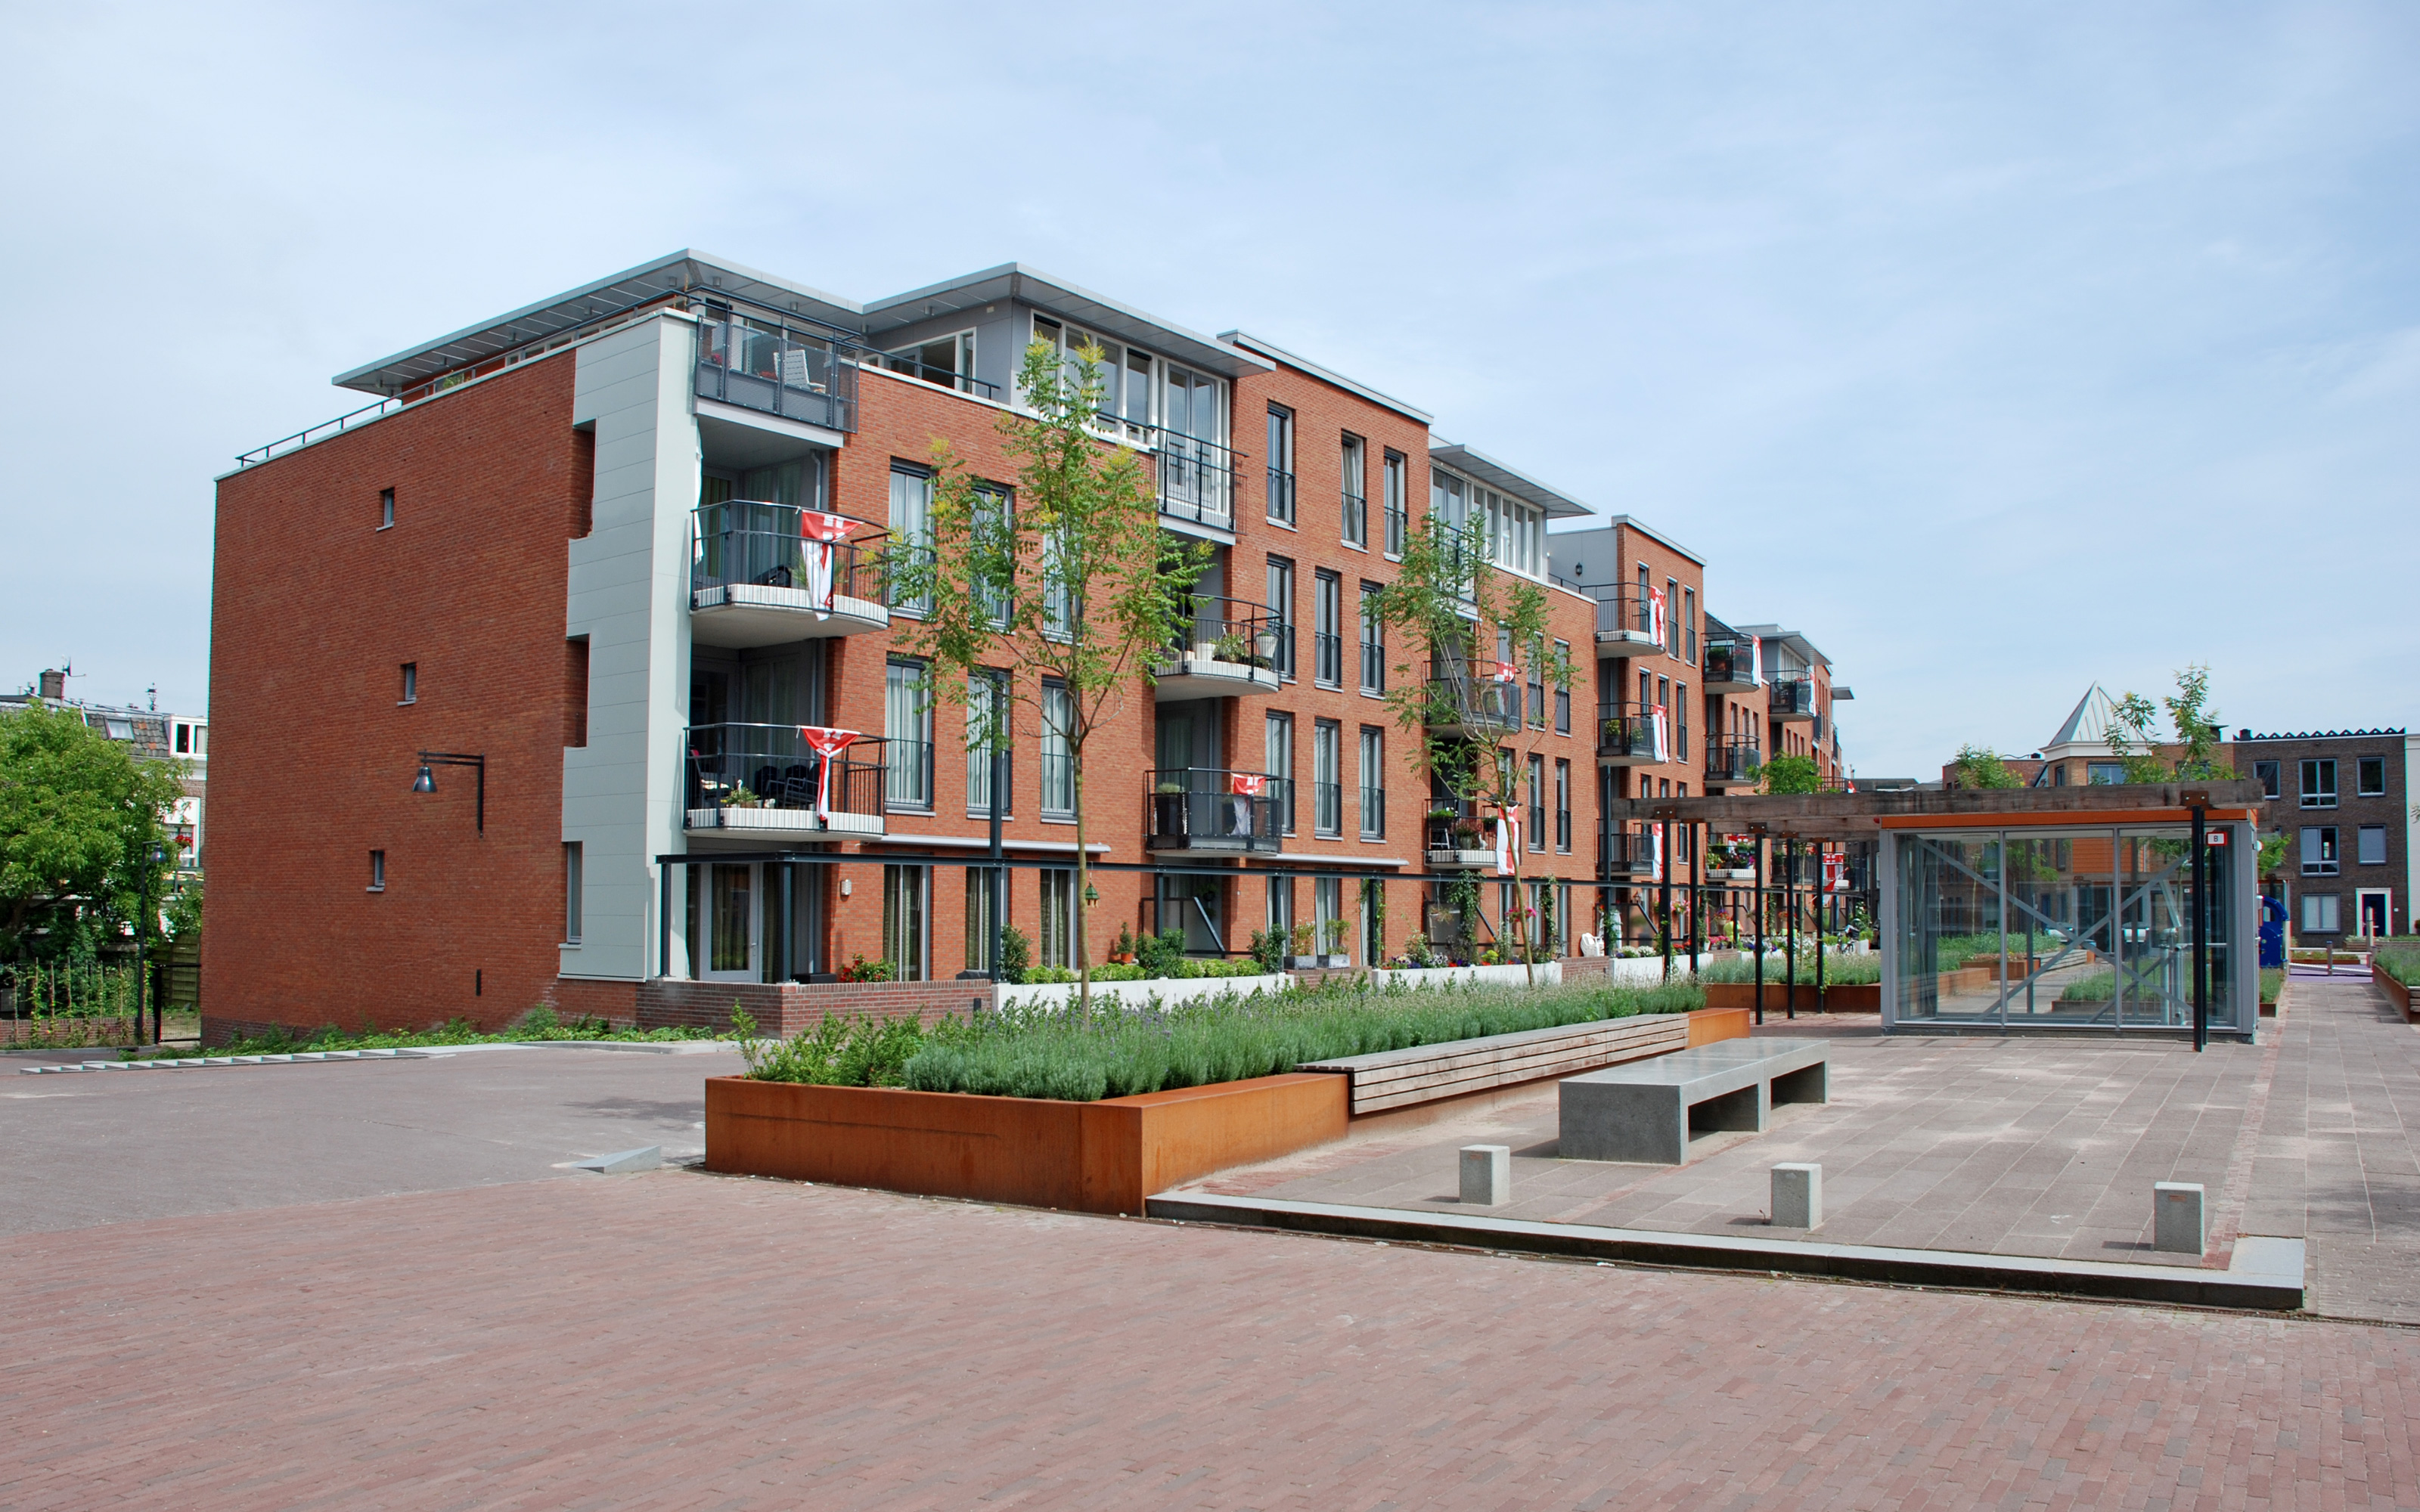 Residential brick buildings with vegetated courtyard